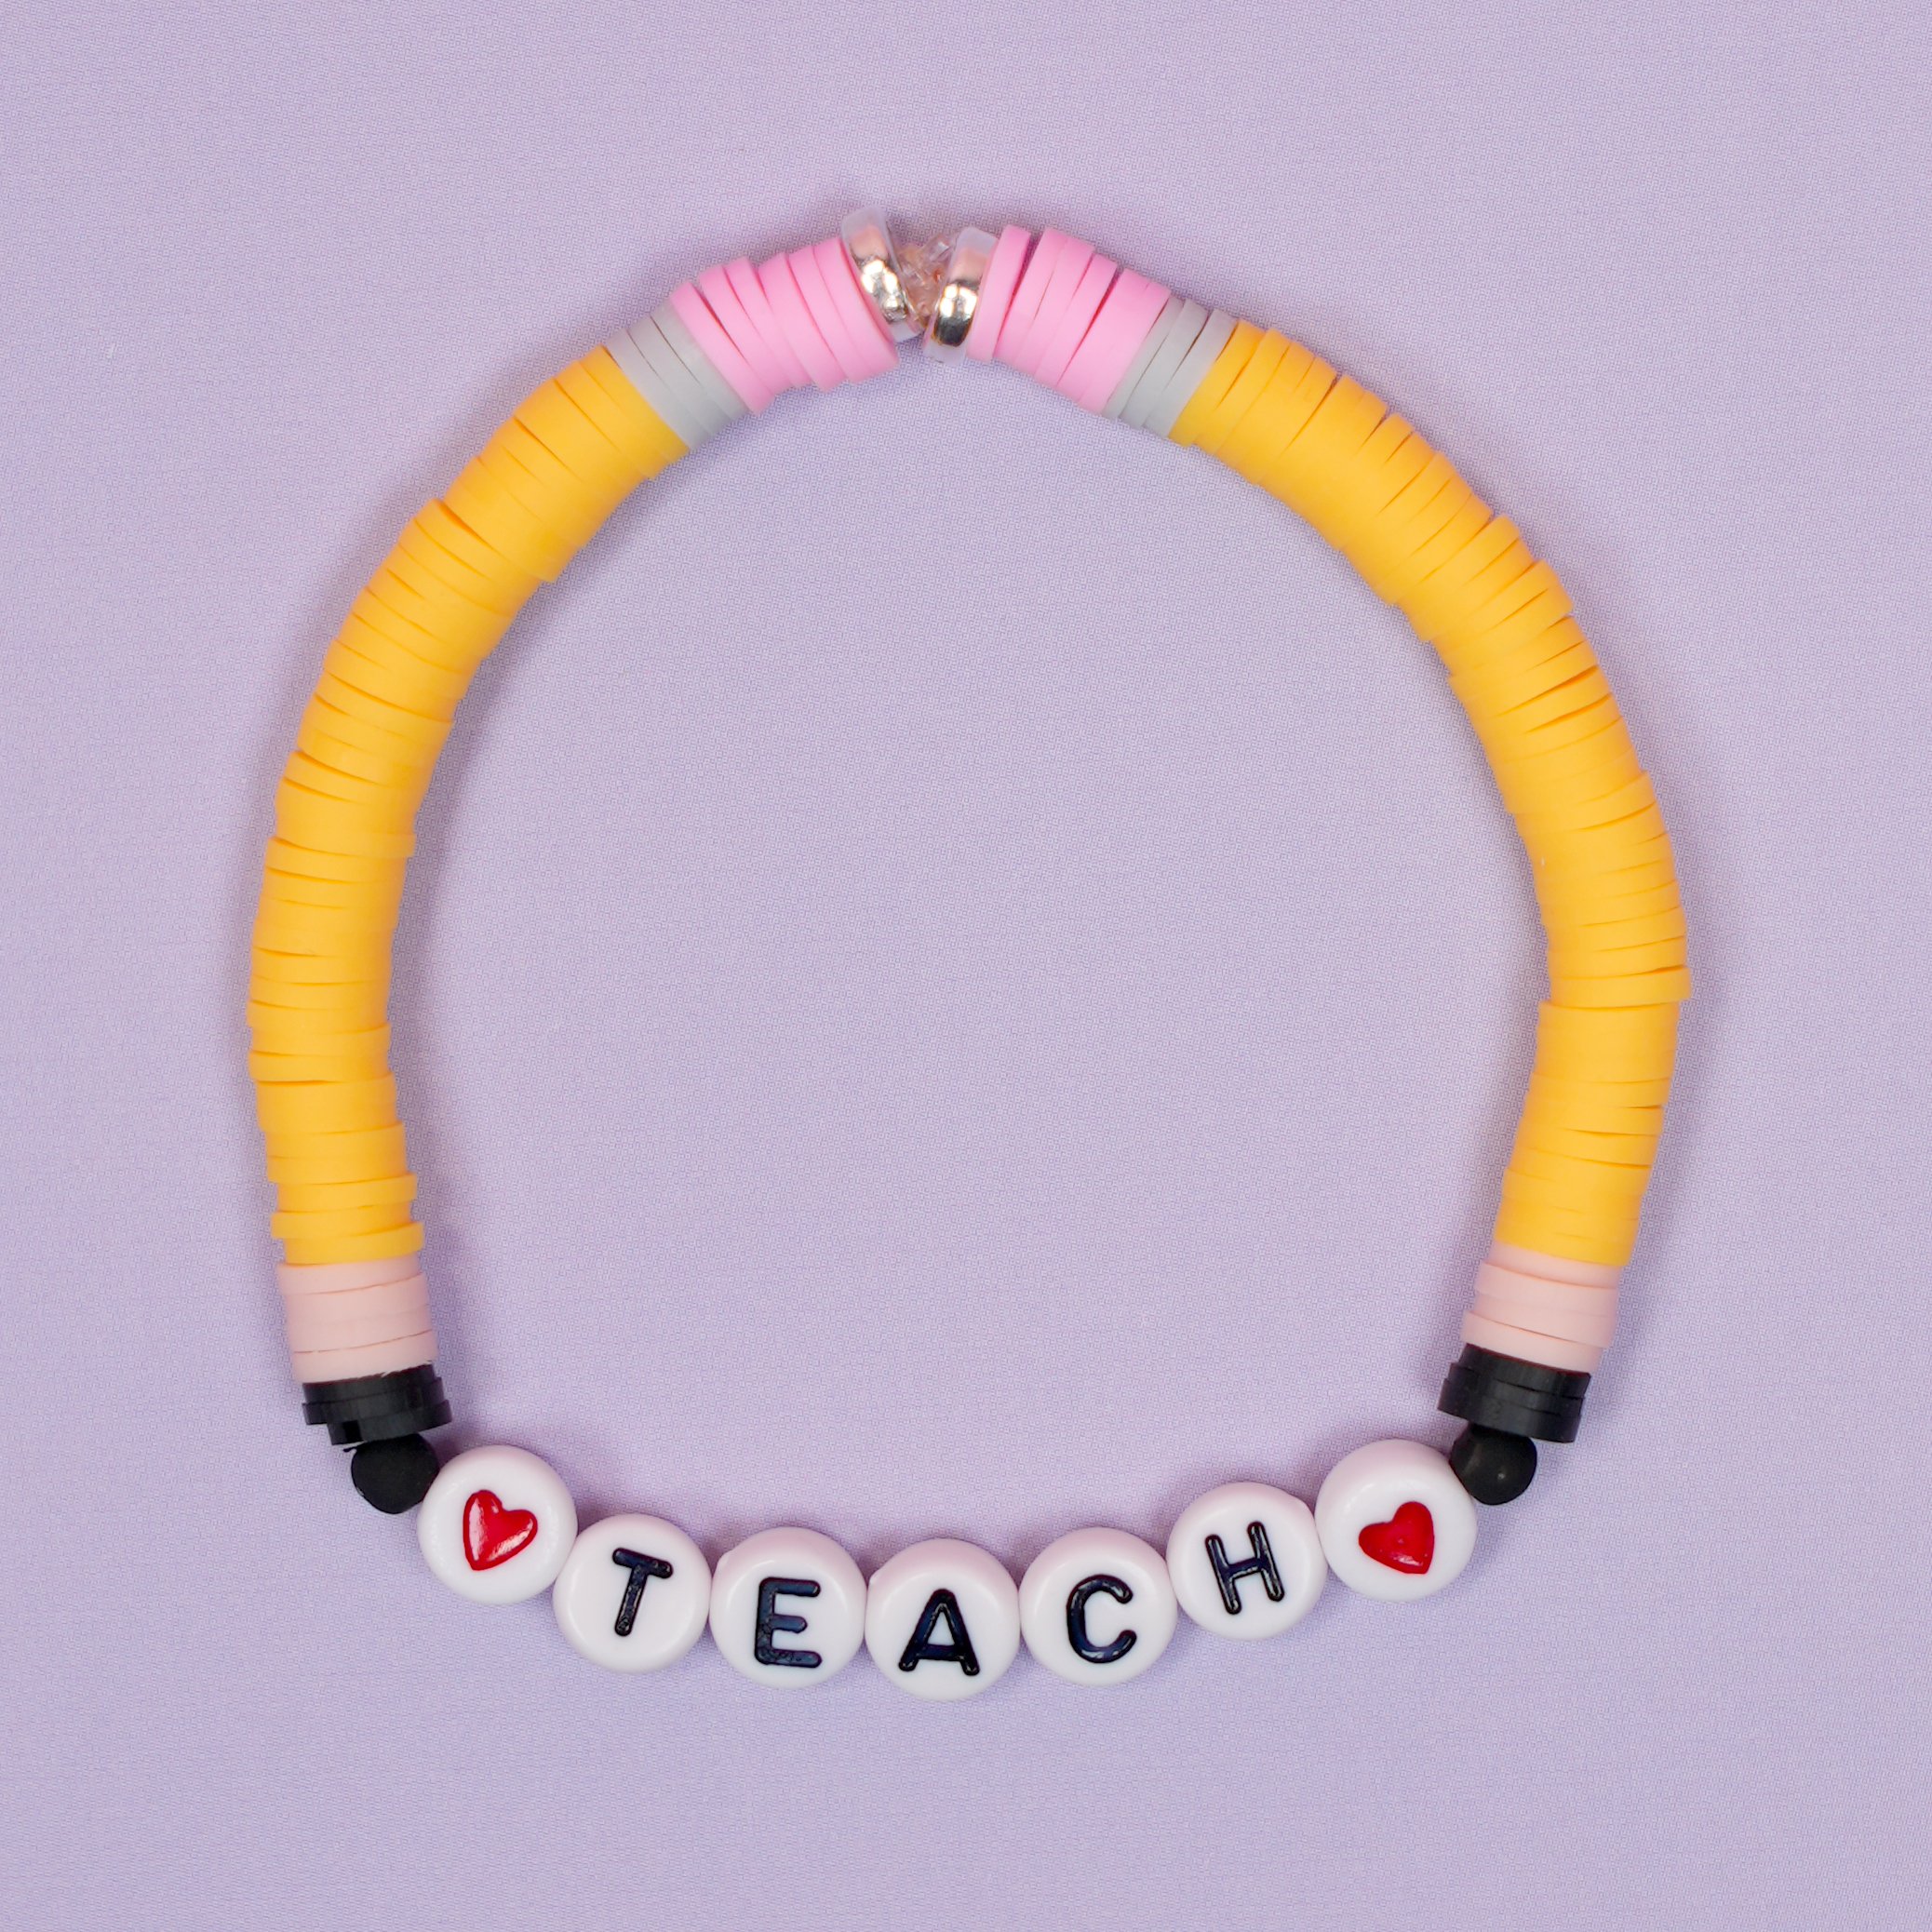 Teacher clay bead bracelet with pencil-inspired design on purple background